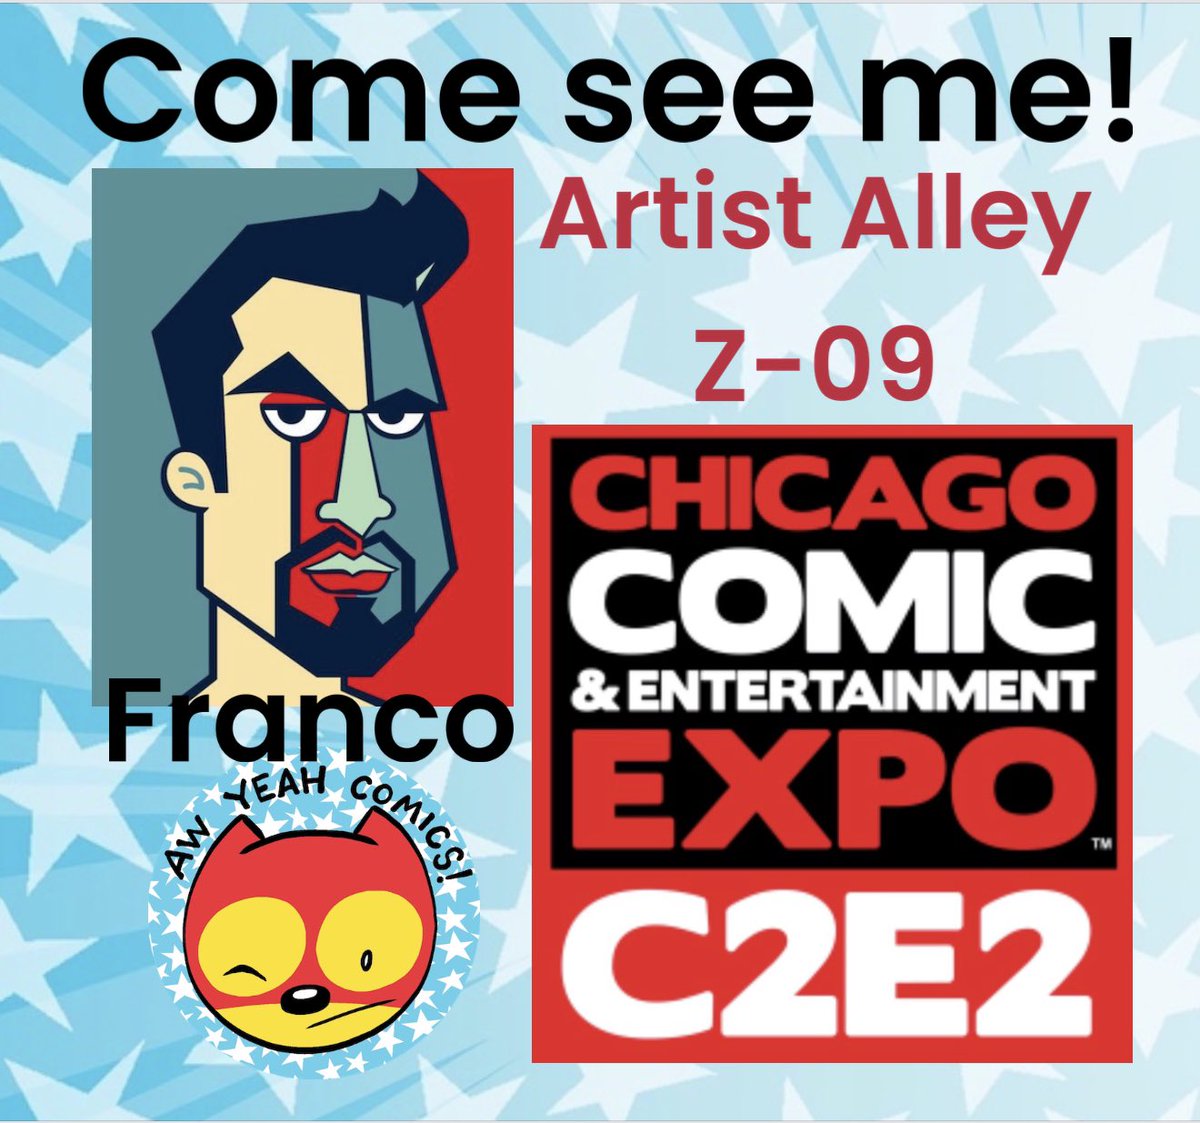 This weekend! #c2e2